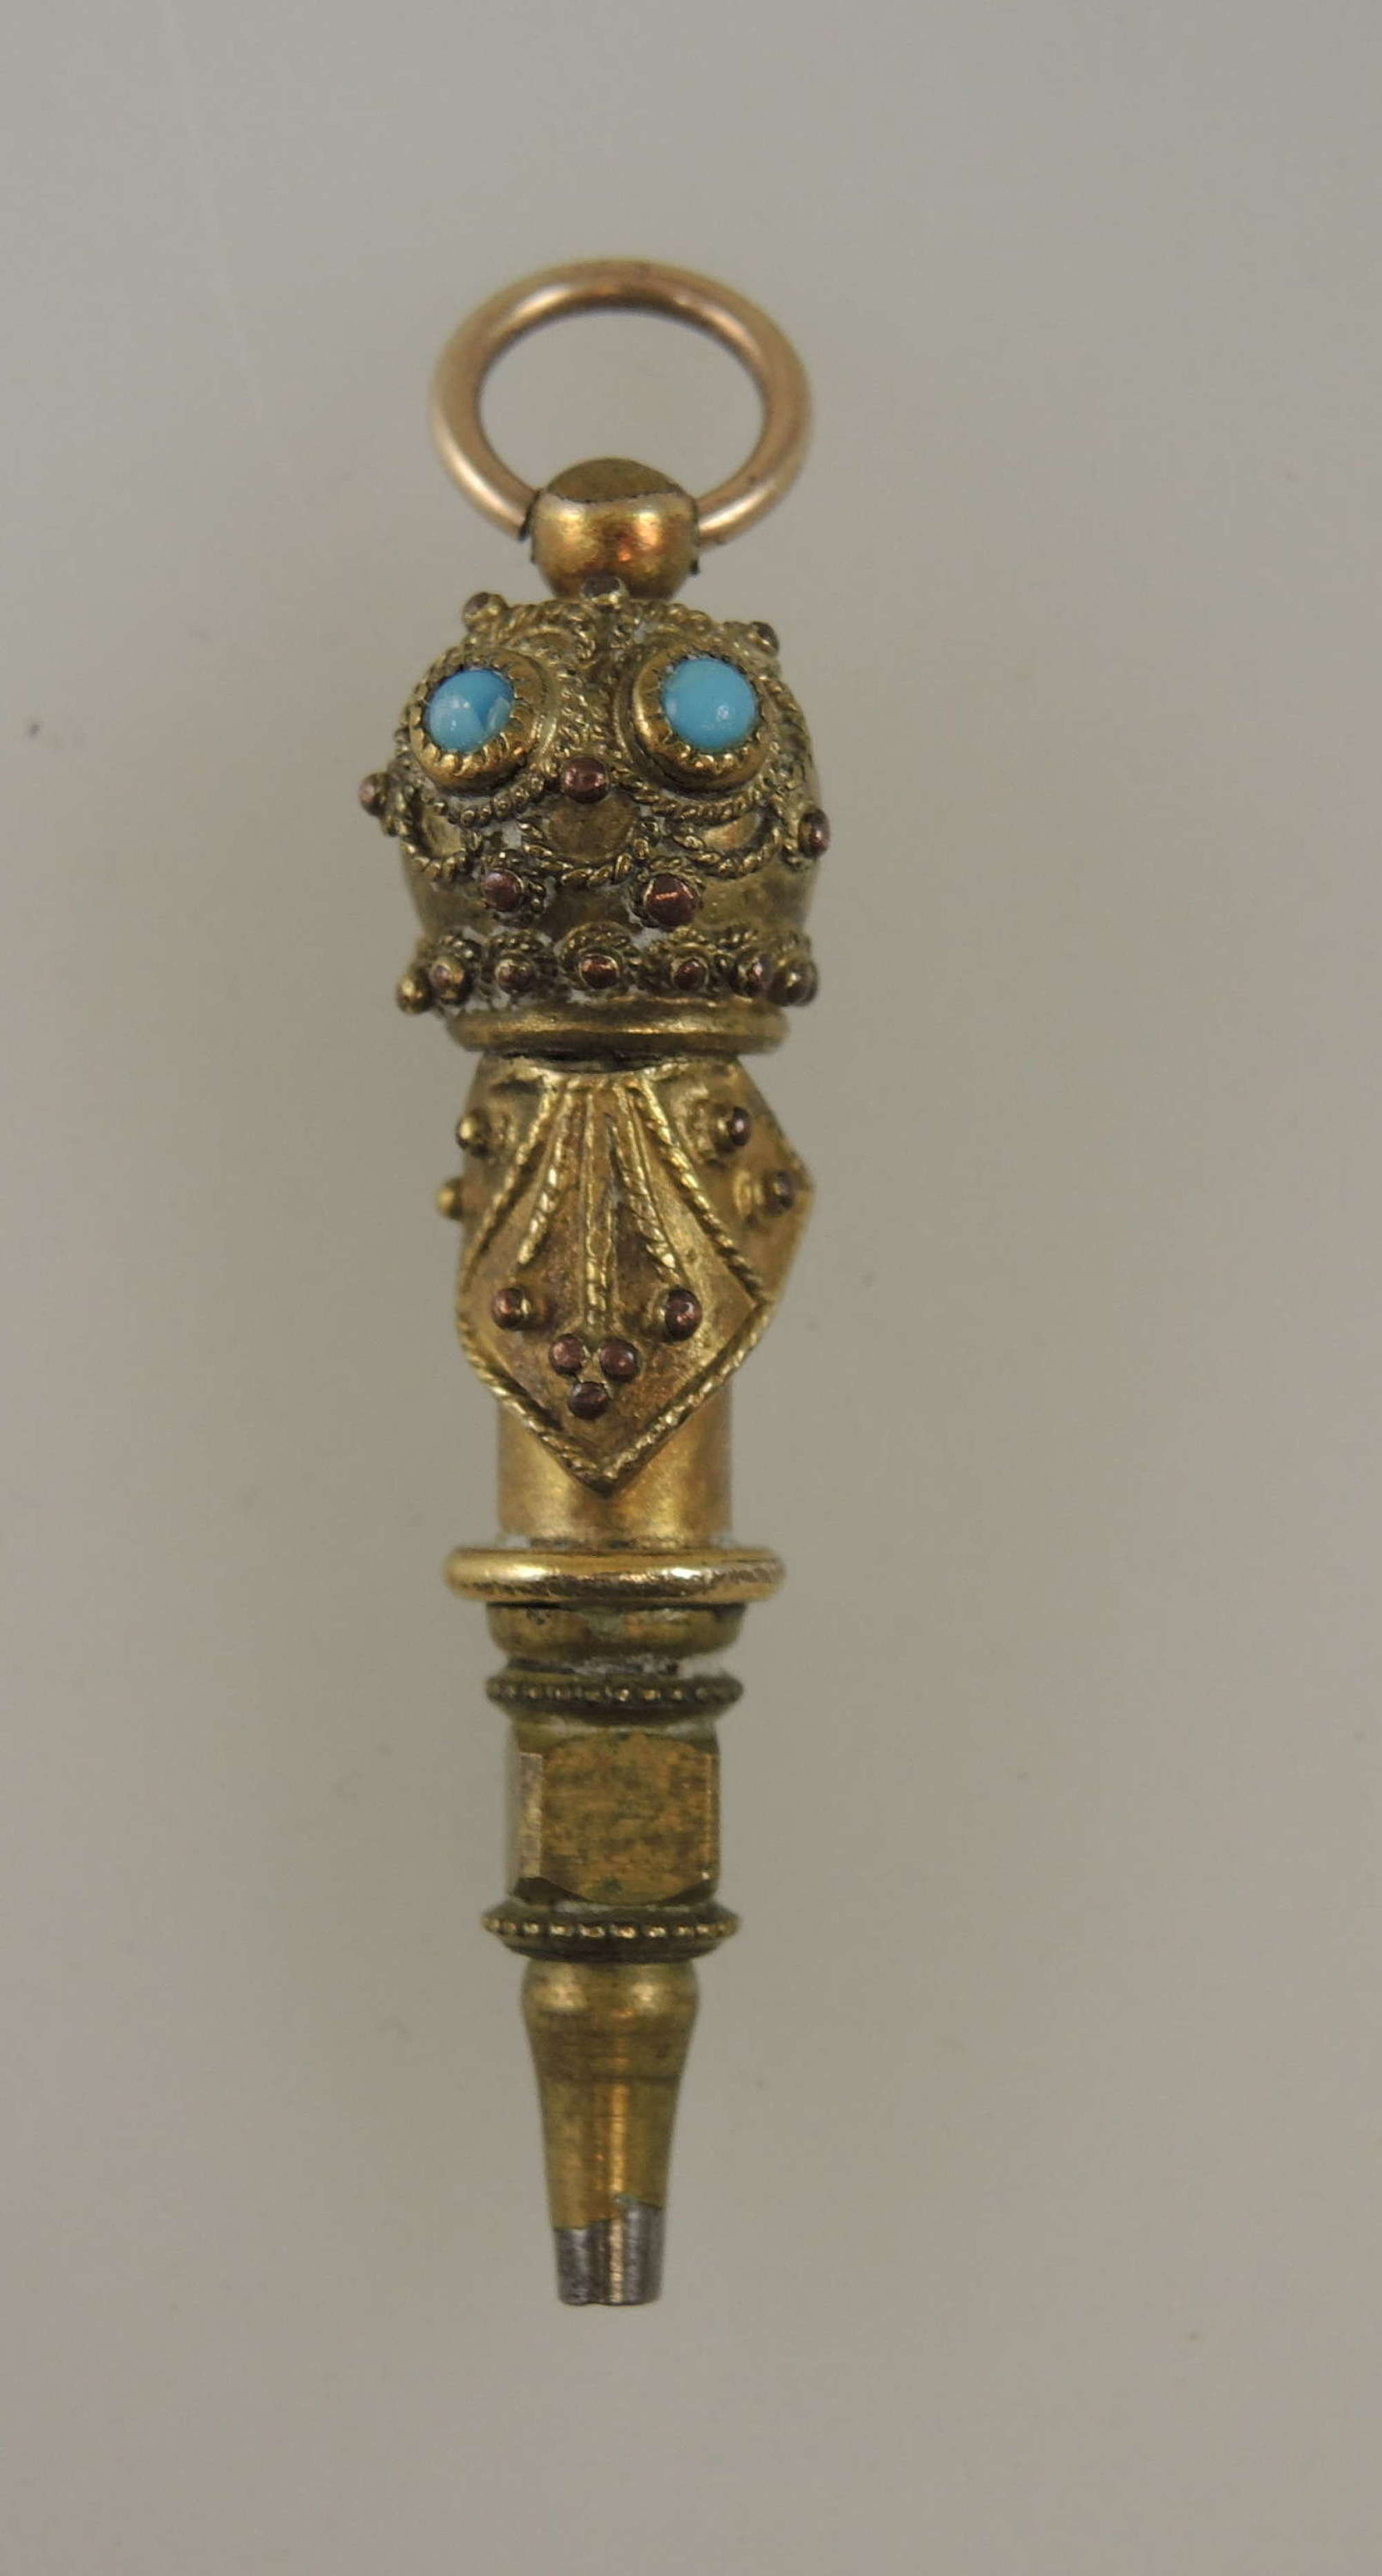 Unusual gilt and turquoise pocket watch key c1850